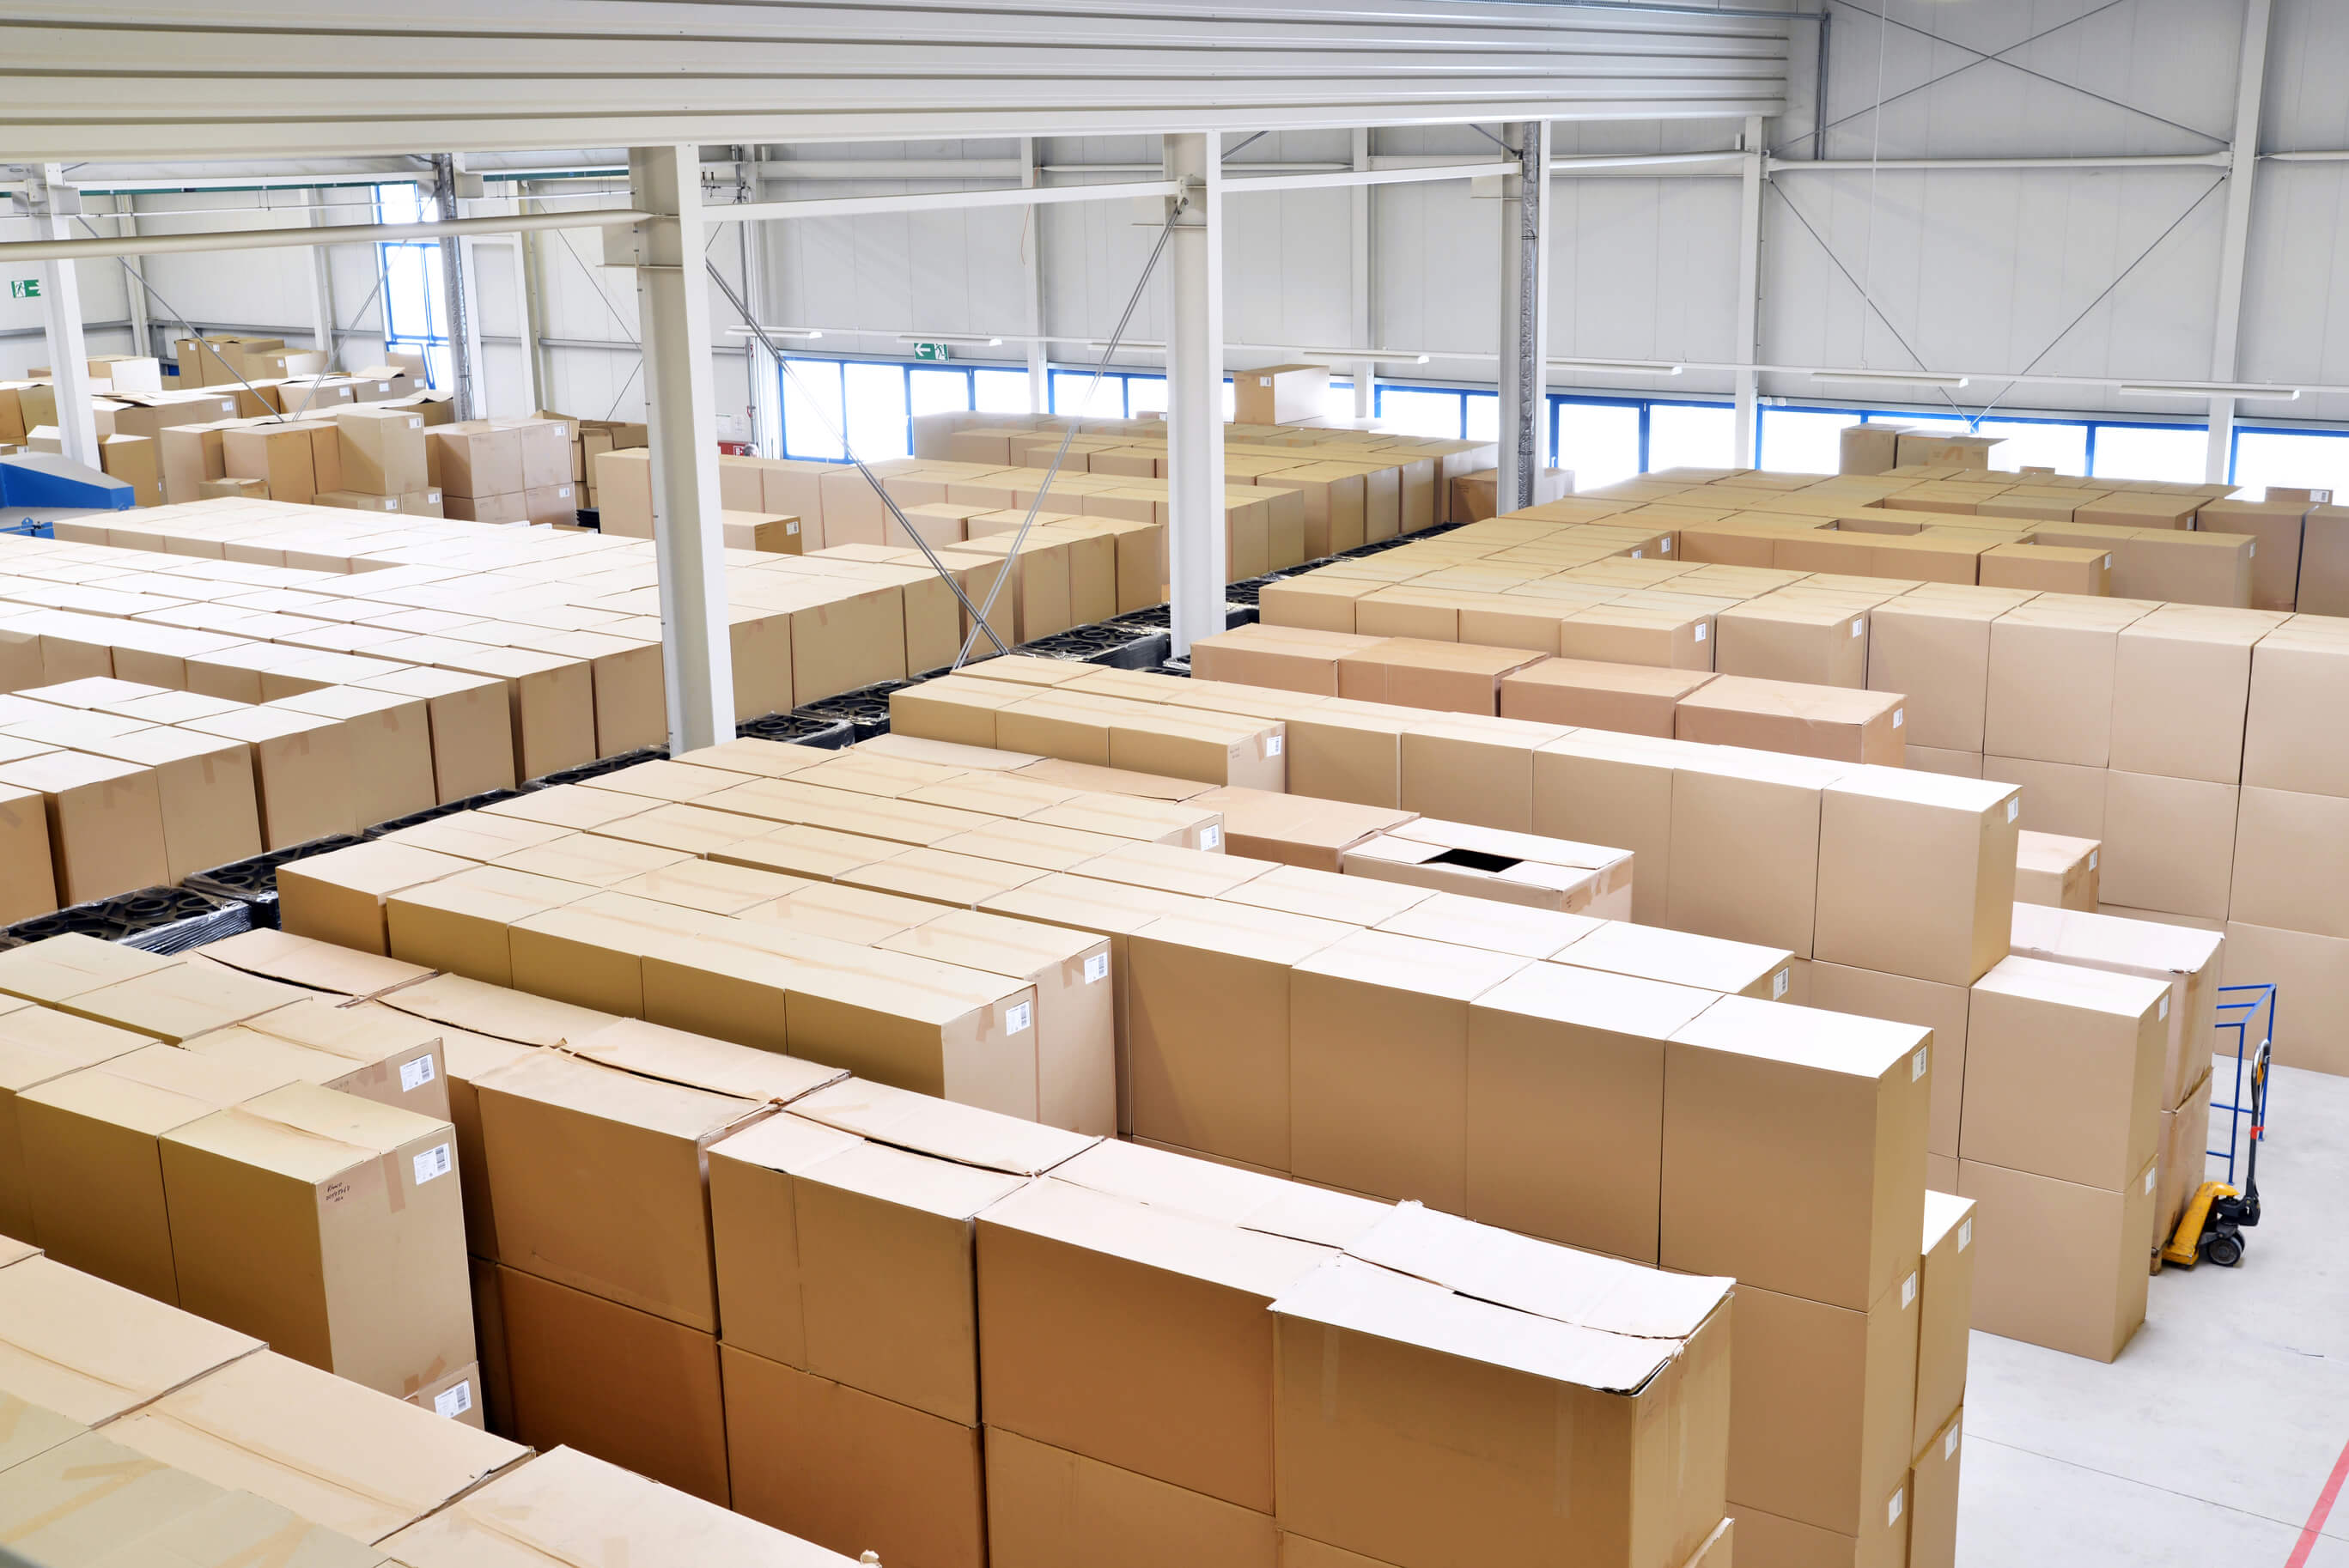 Why Use Self-Storage While Renovating?